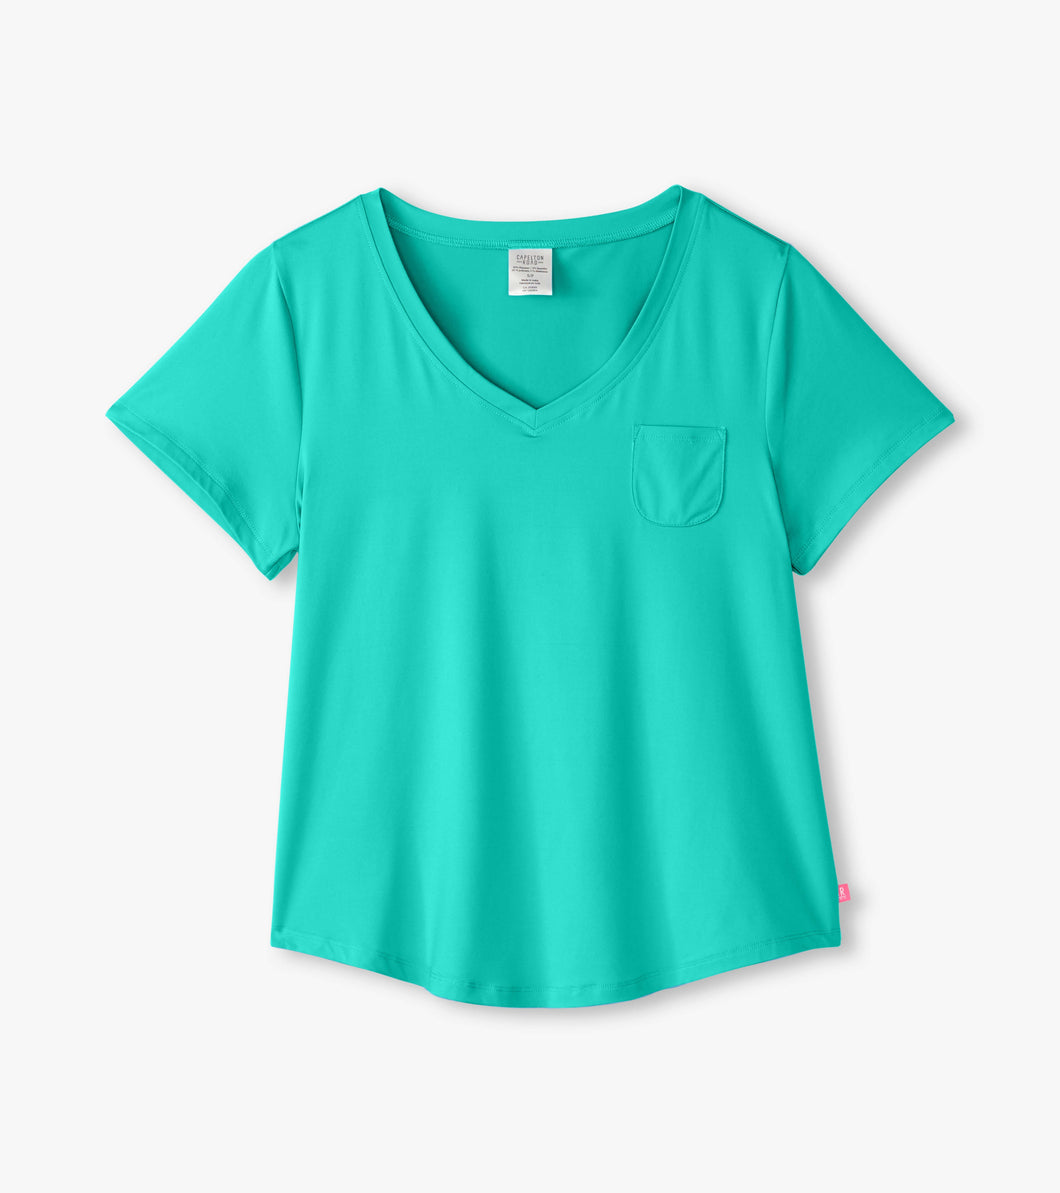 V-Neck Tee In A Bag - Seagreen